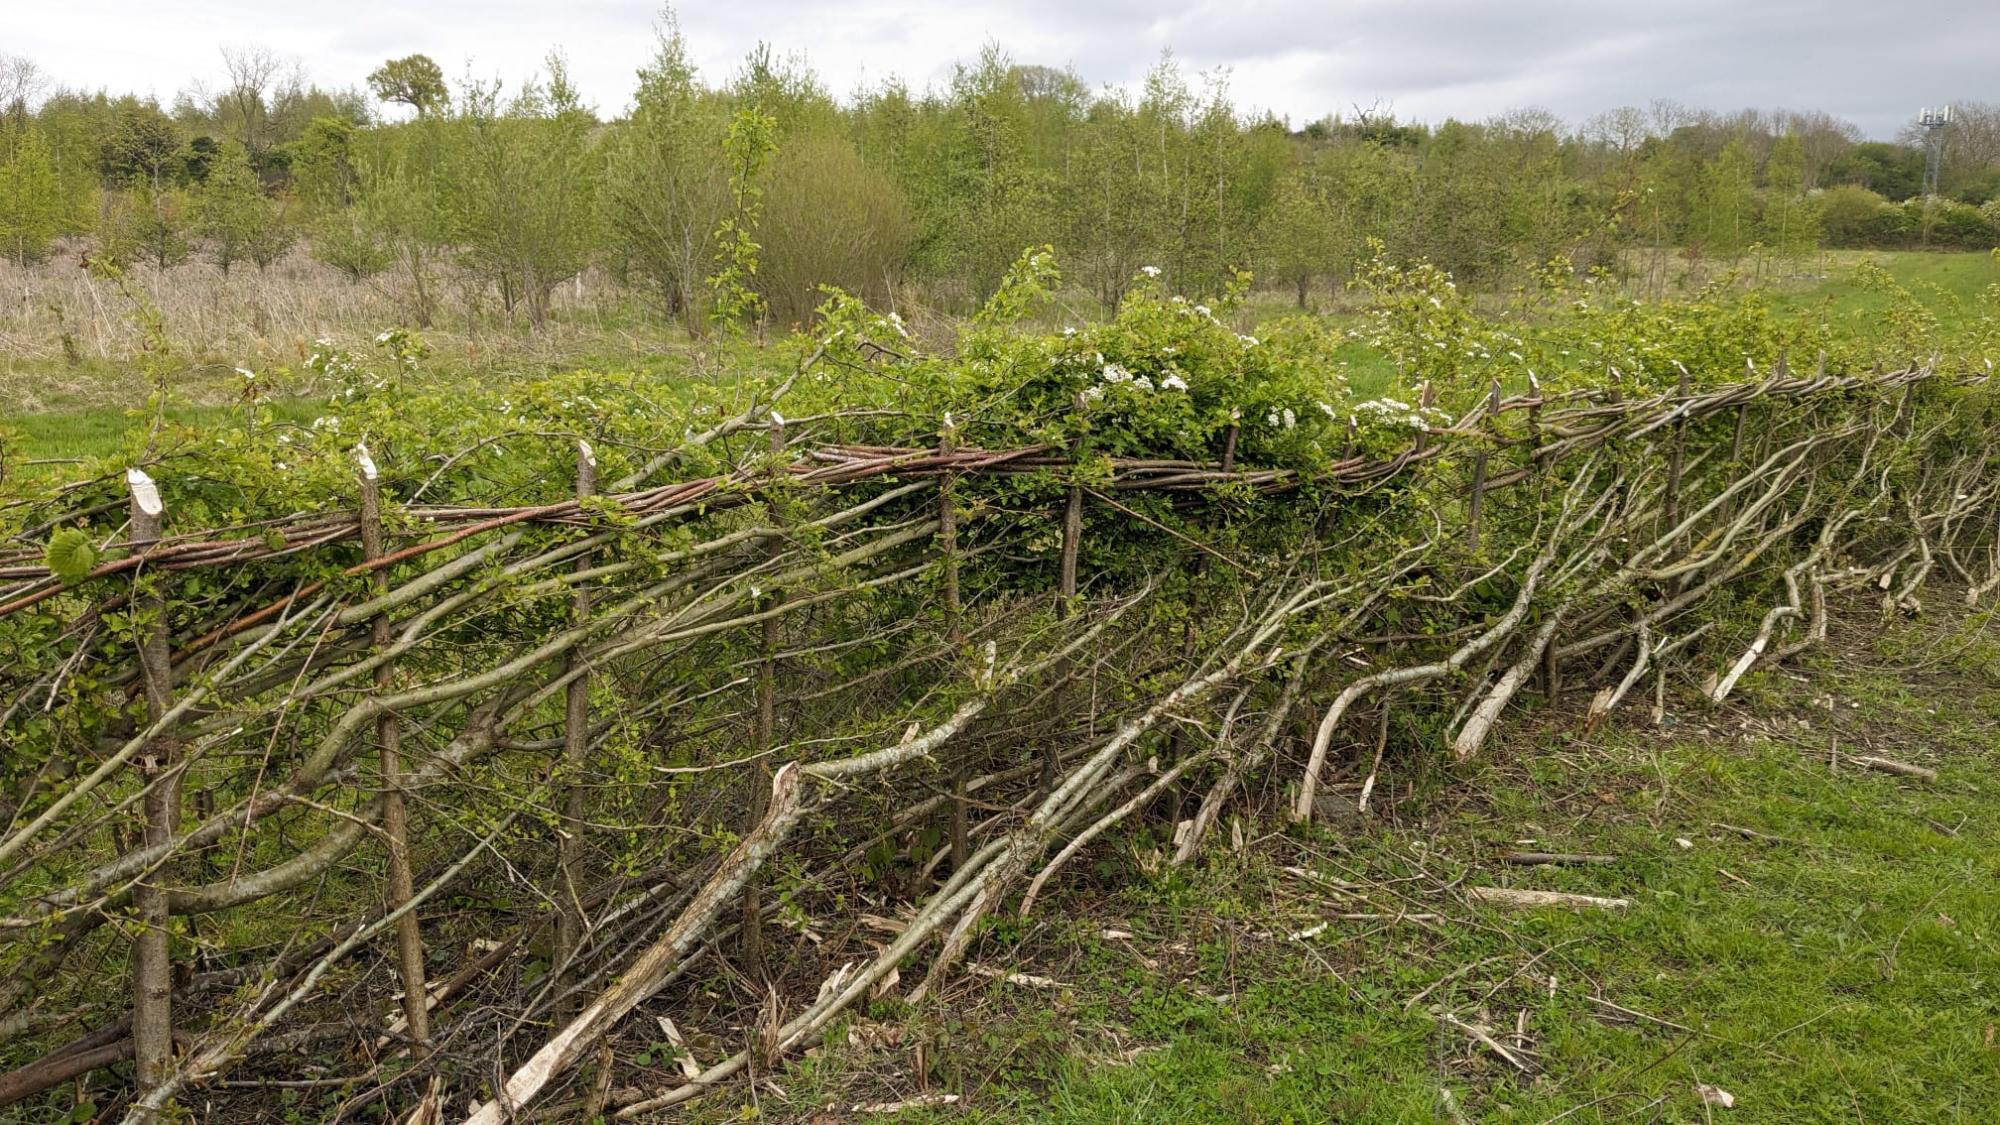 A hedge that has been laid by the Forestry team with new growth